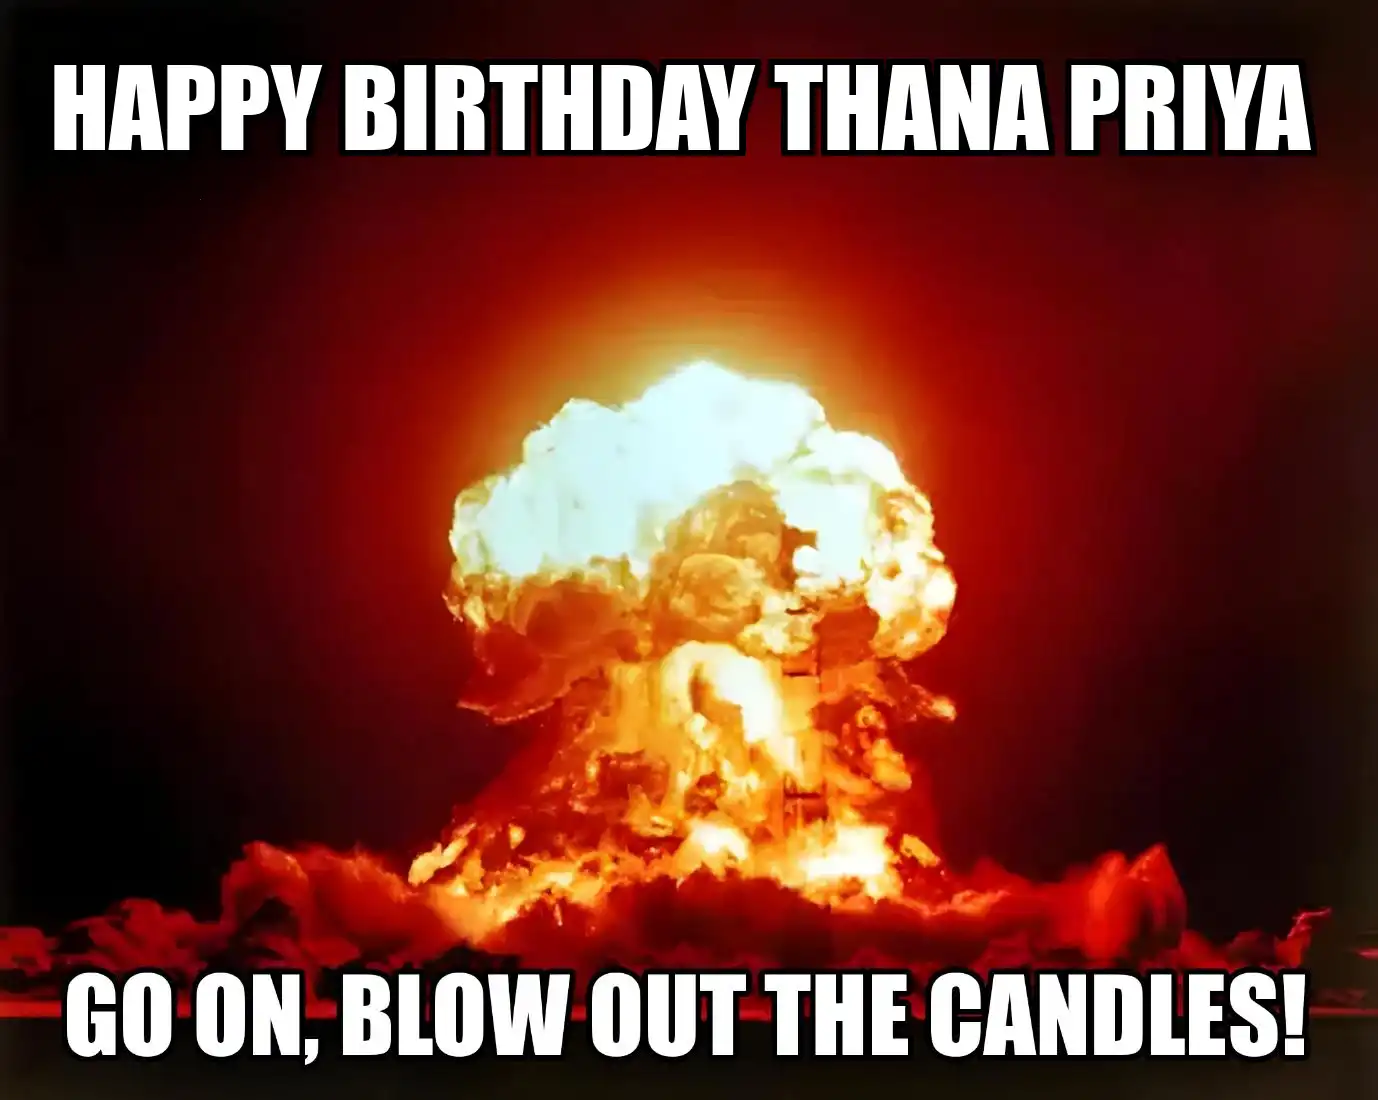 Happy Birthday Thana priya Go On Blow Out The Candles Meme